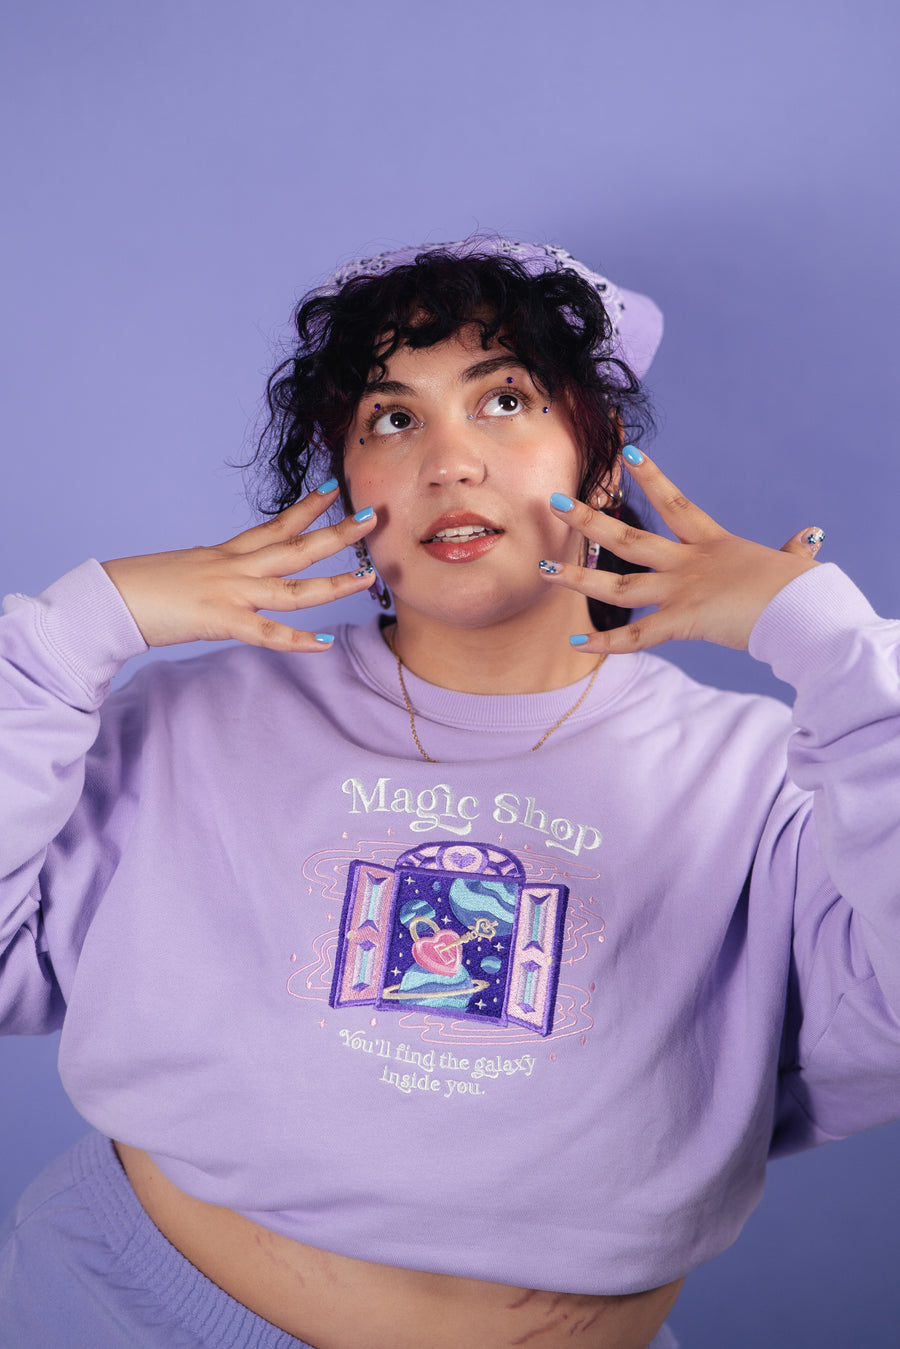 Model infront of purple wall wearing a purple crewneck sweatshirt inspired by the BTS song Magic Shop.